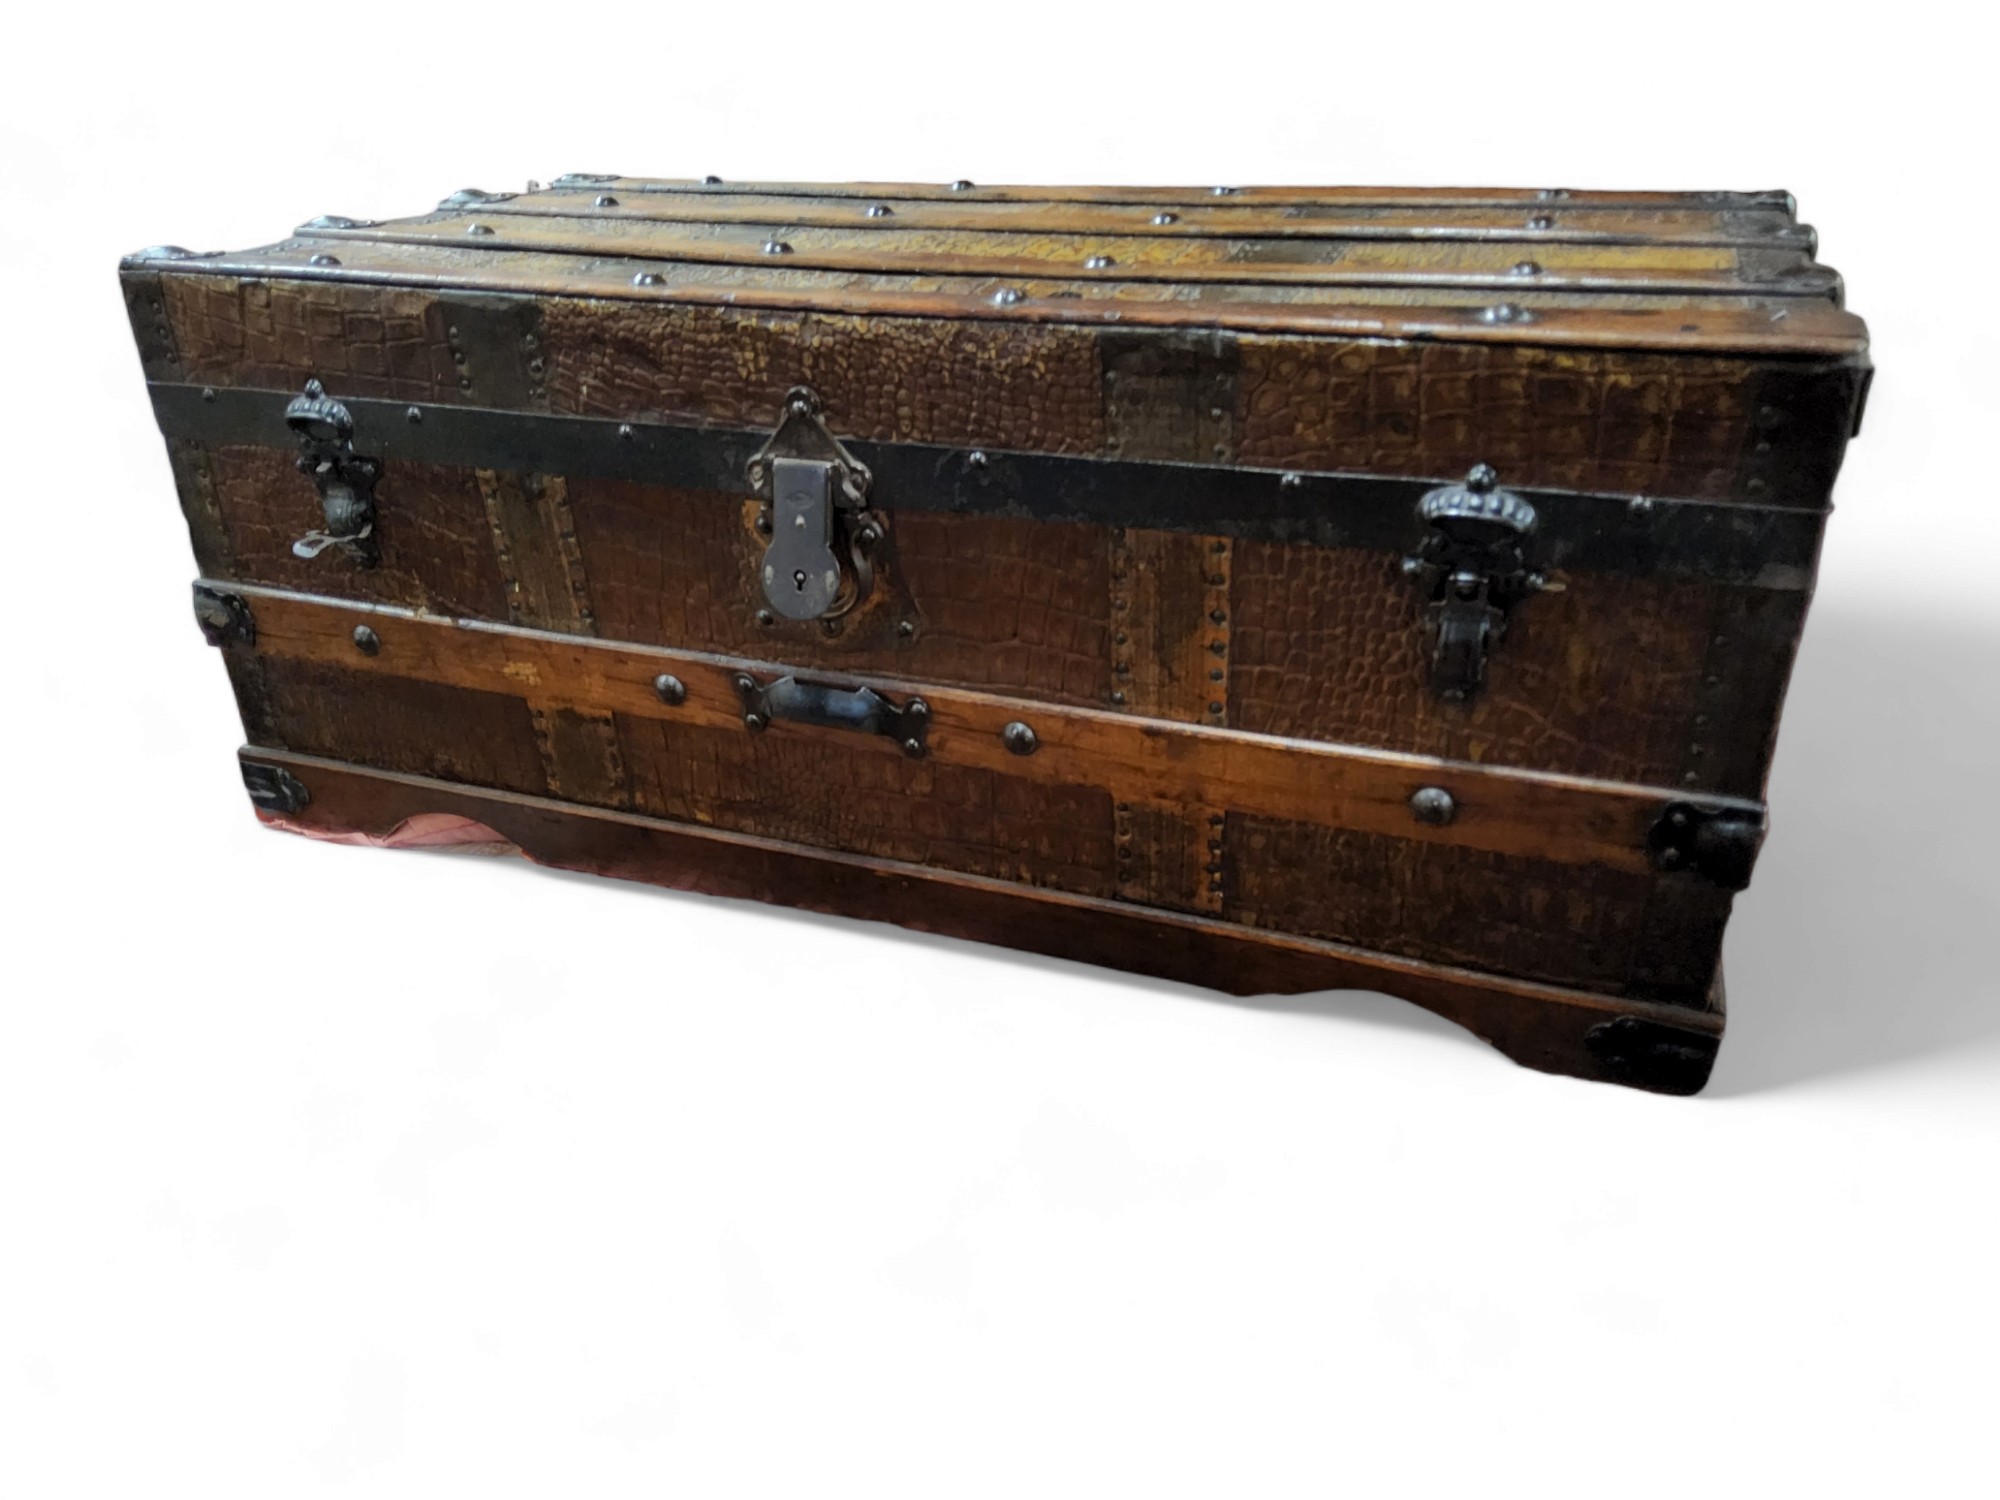 An early 20th century wood and pressed metal faux crocodile skin bound travel trunk